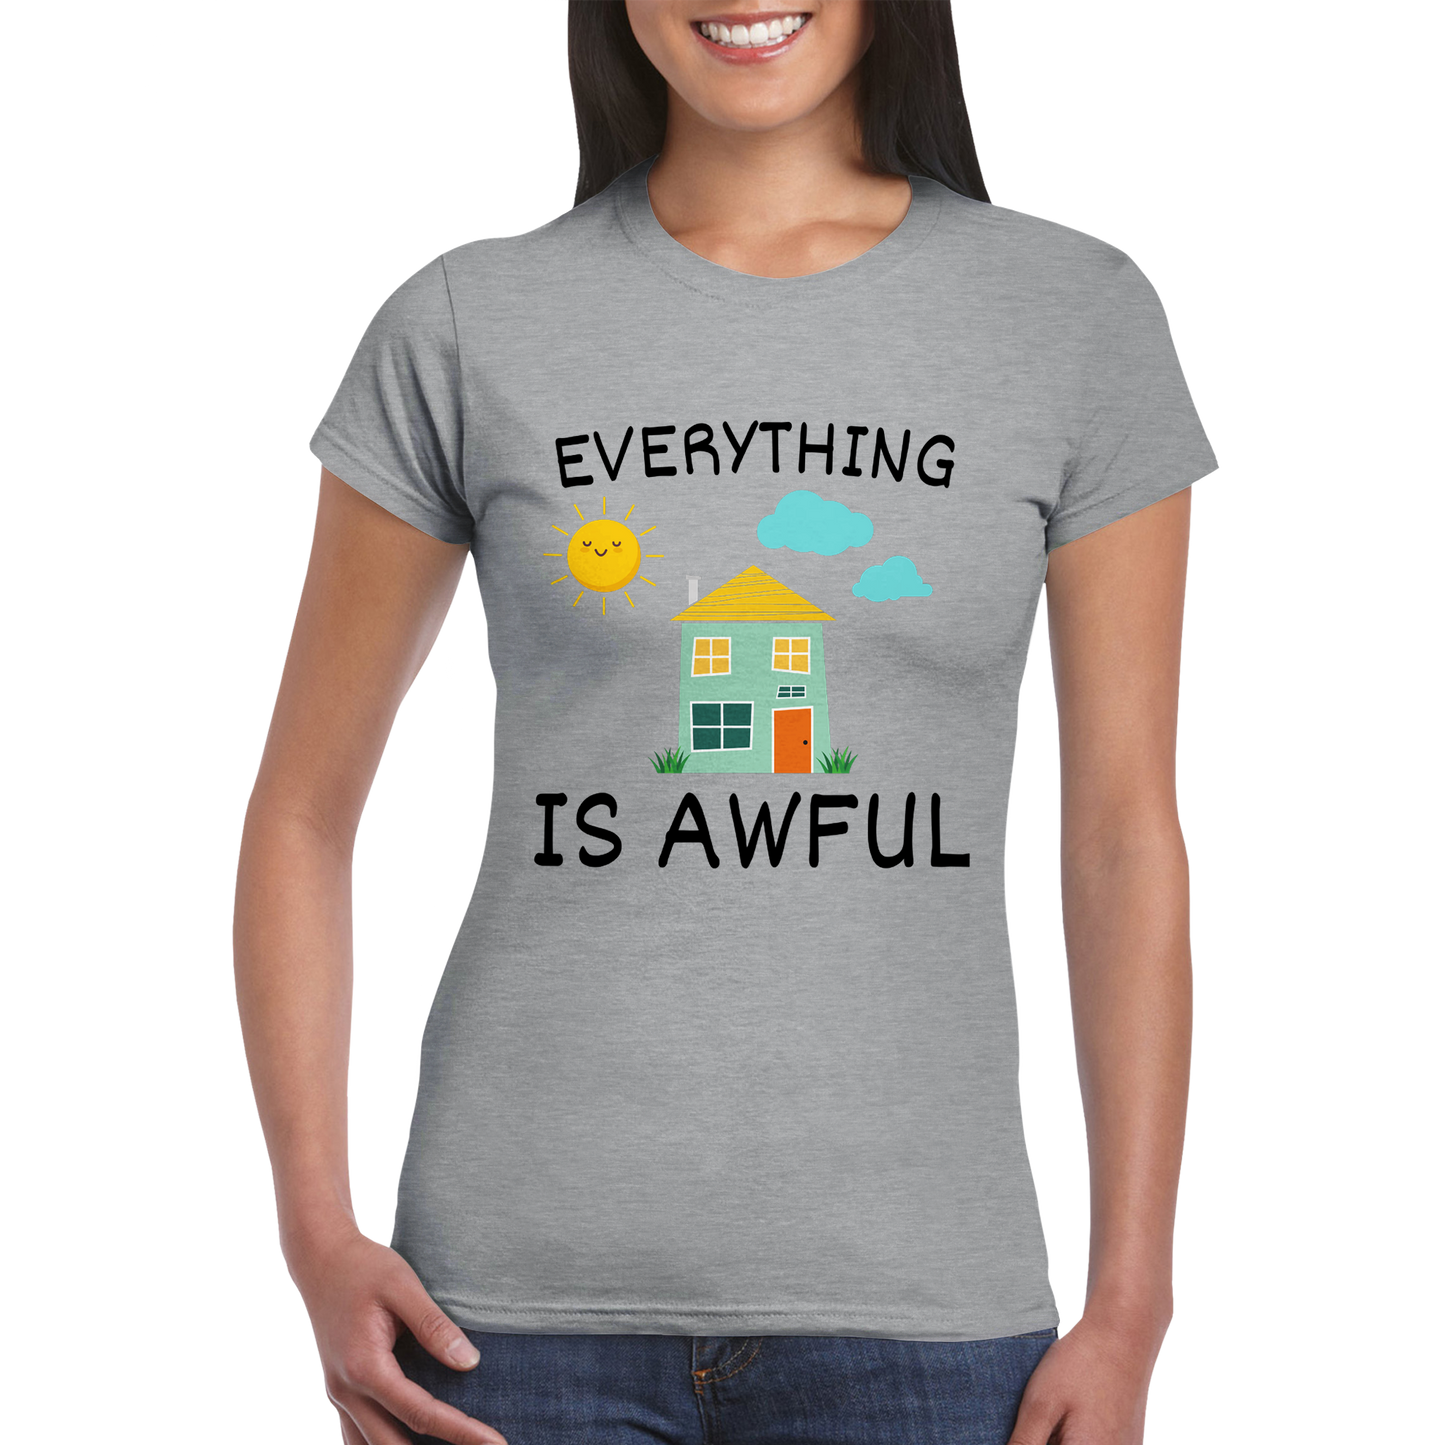 Everything is Awful - Classic Women's Crewneck T-Shirt